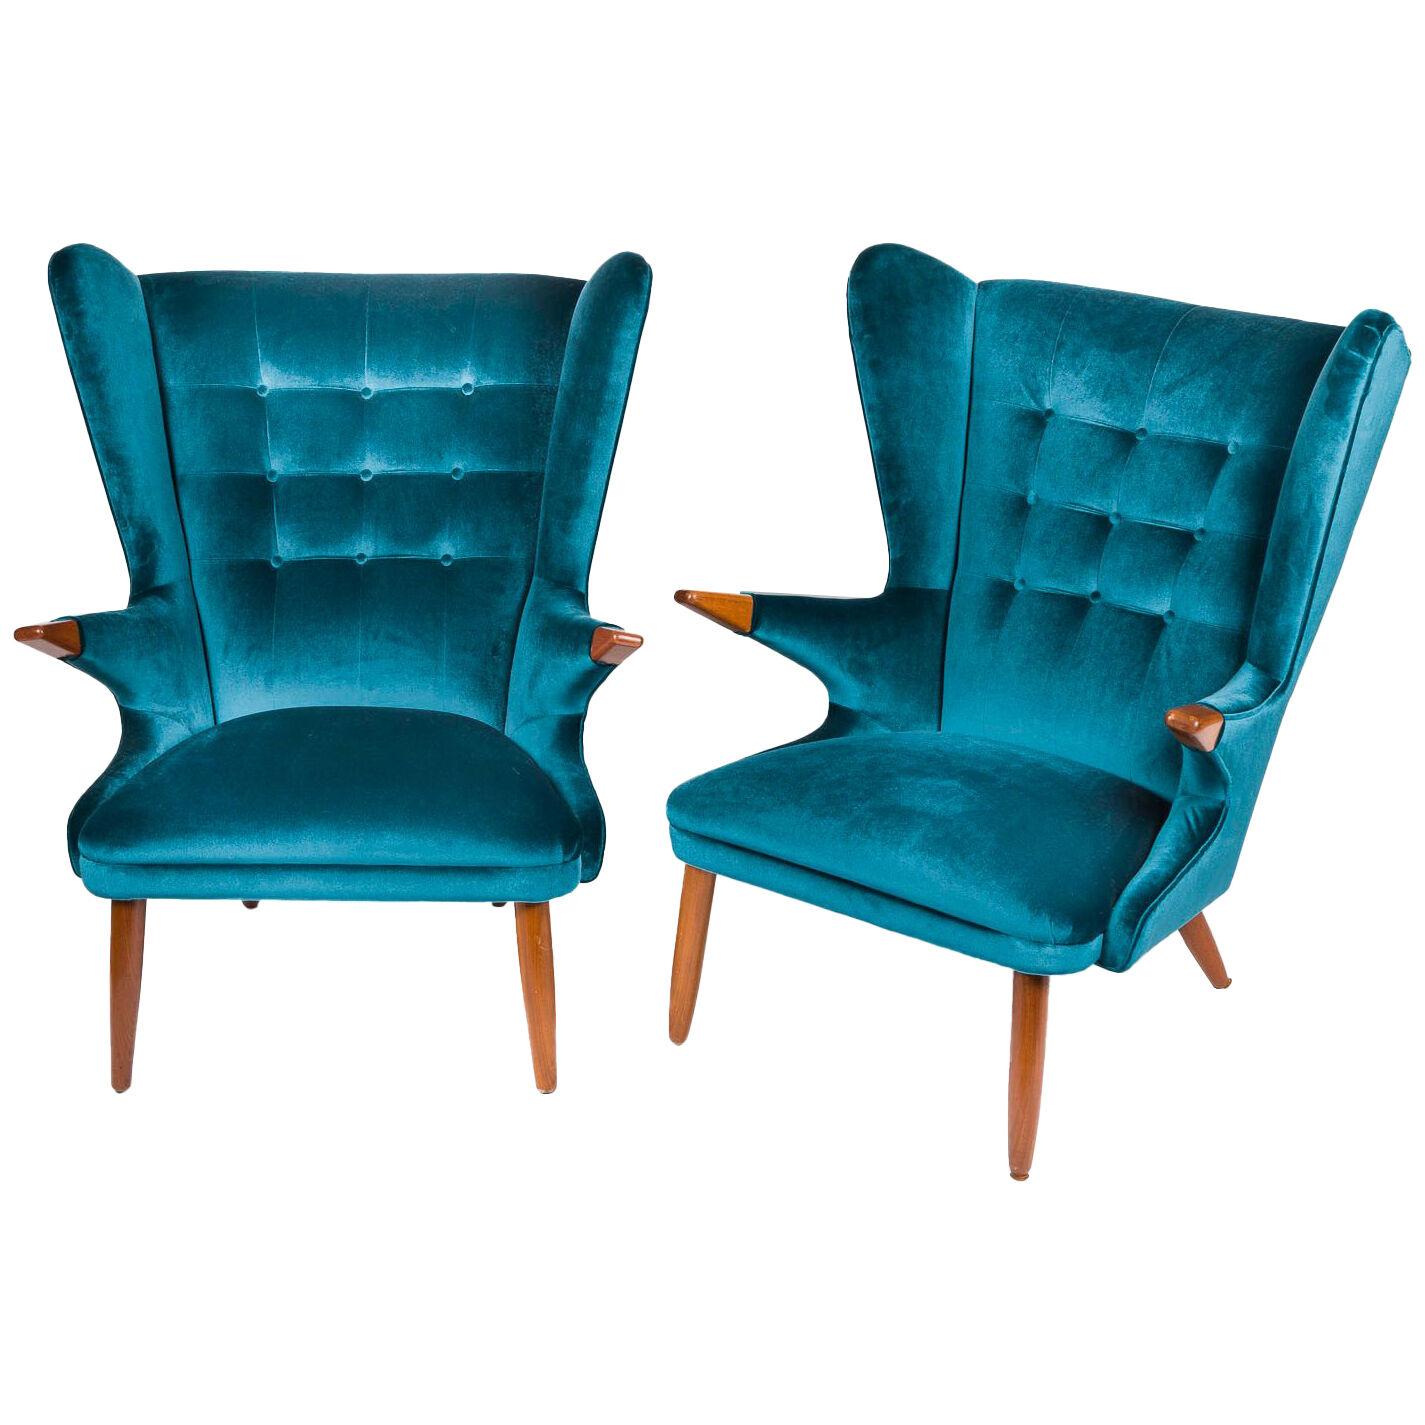 A pair of easy chairs designed by Svend Skipper, circa 1965